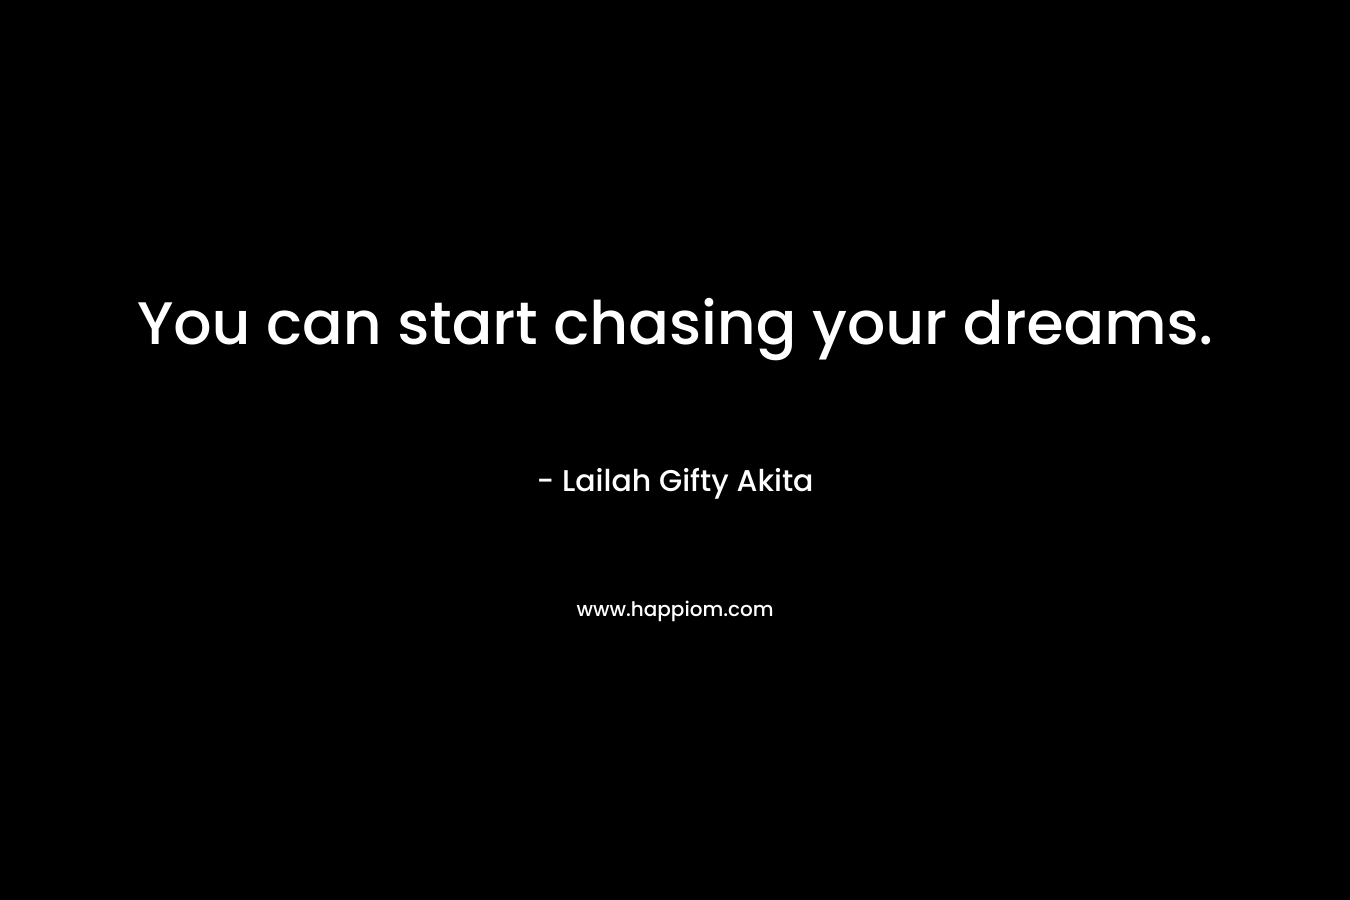 You can start chasing your dreams.